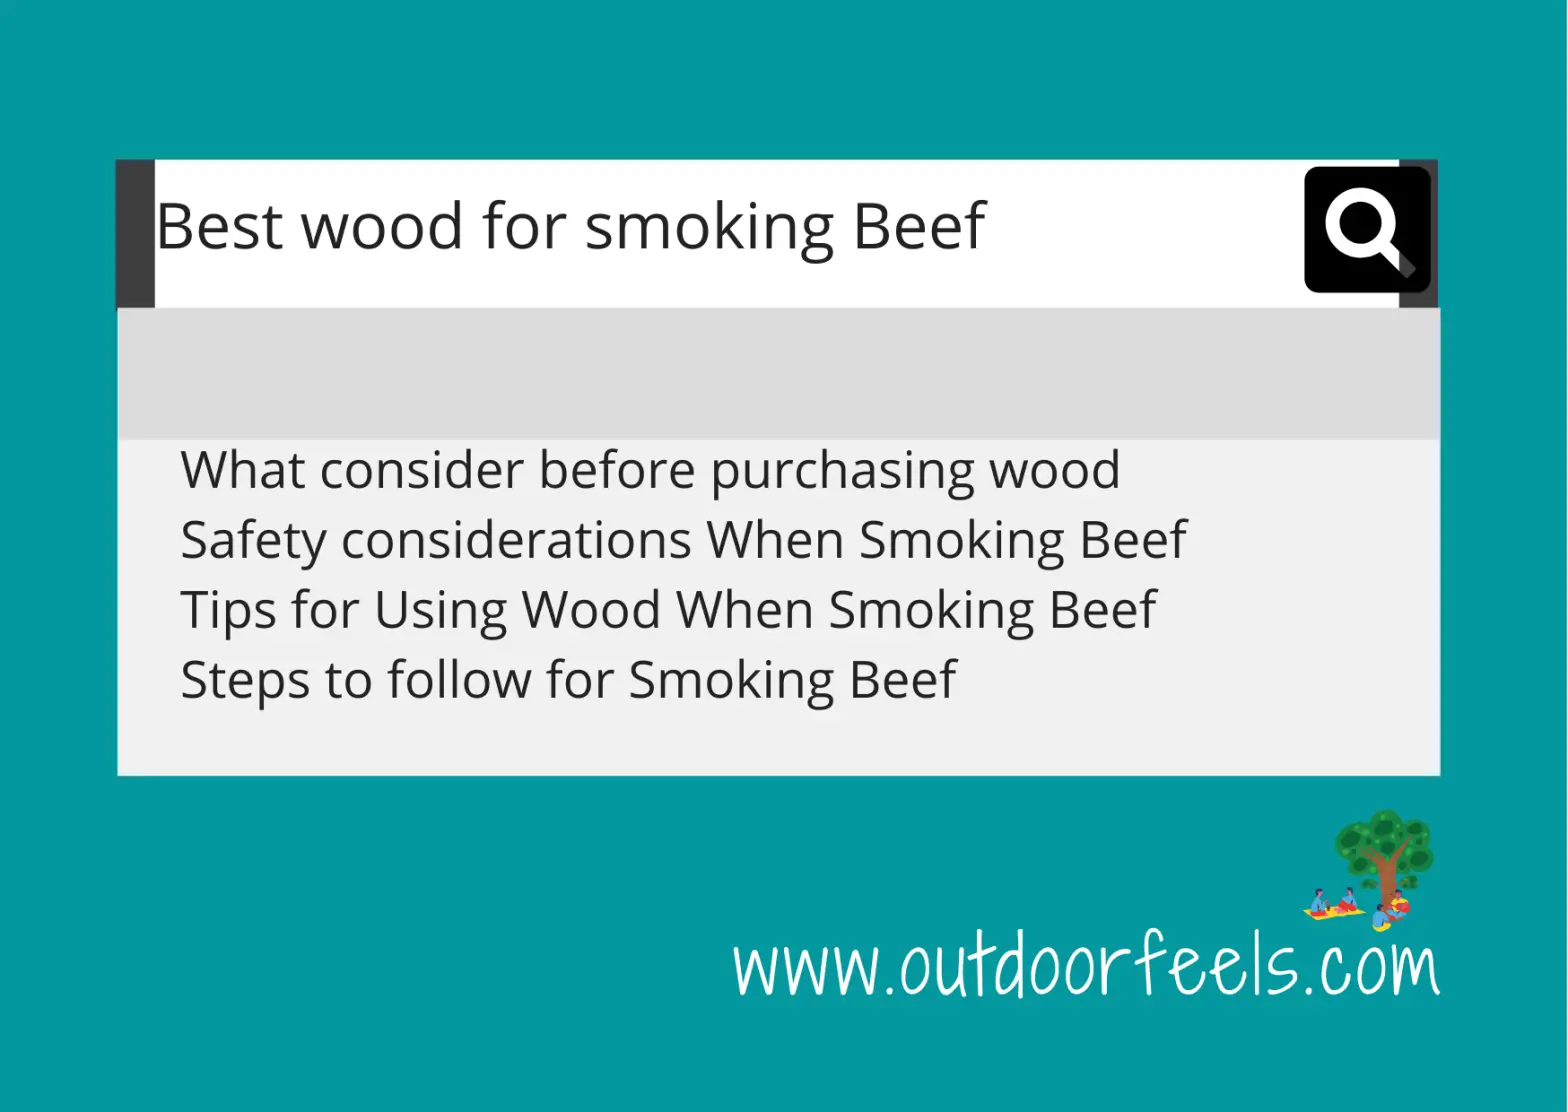 Best wood for smoking Beef